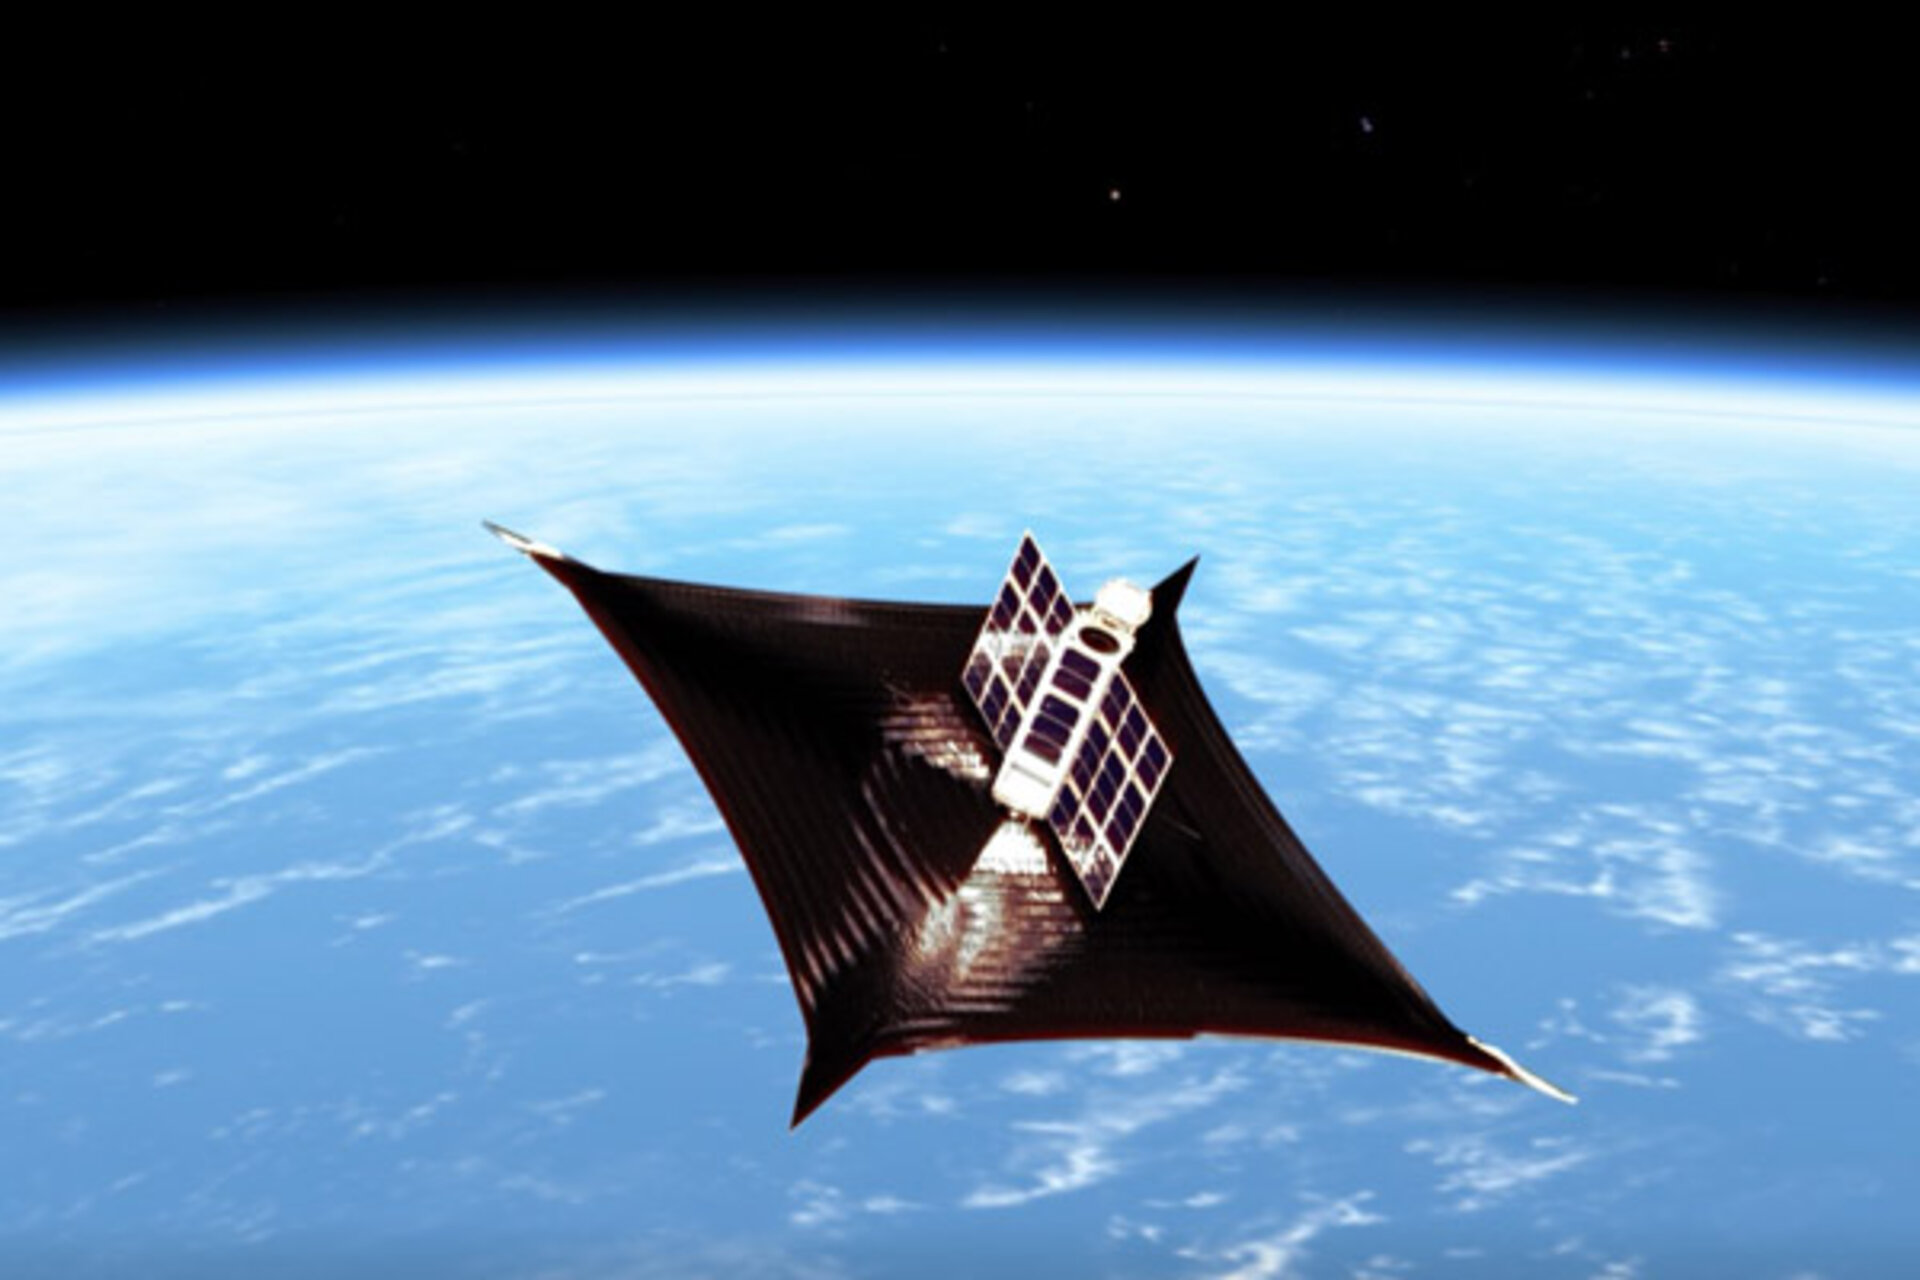 ADEO sail for deorbiting